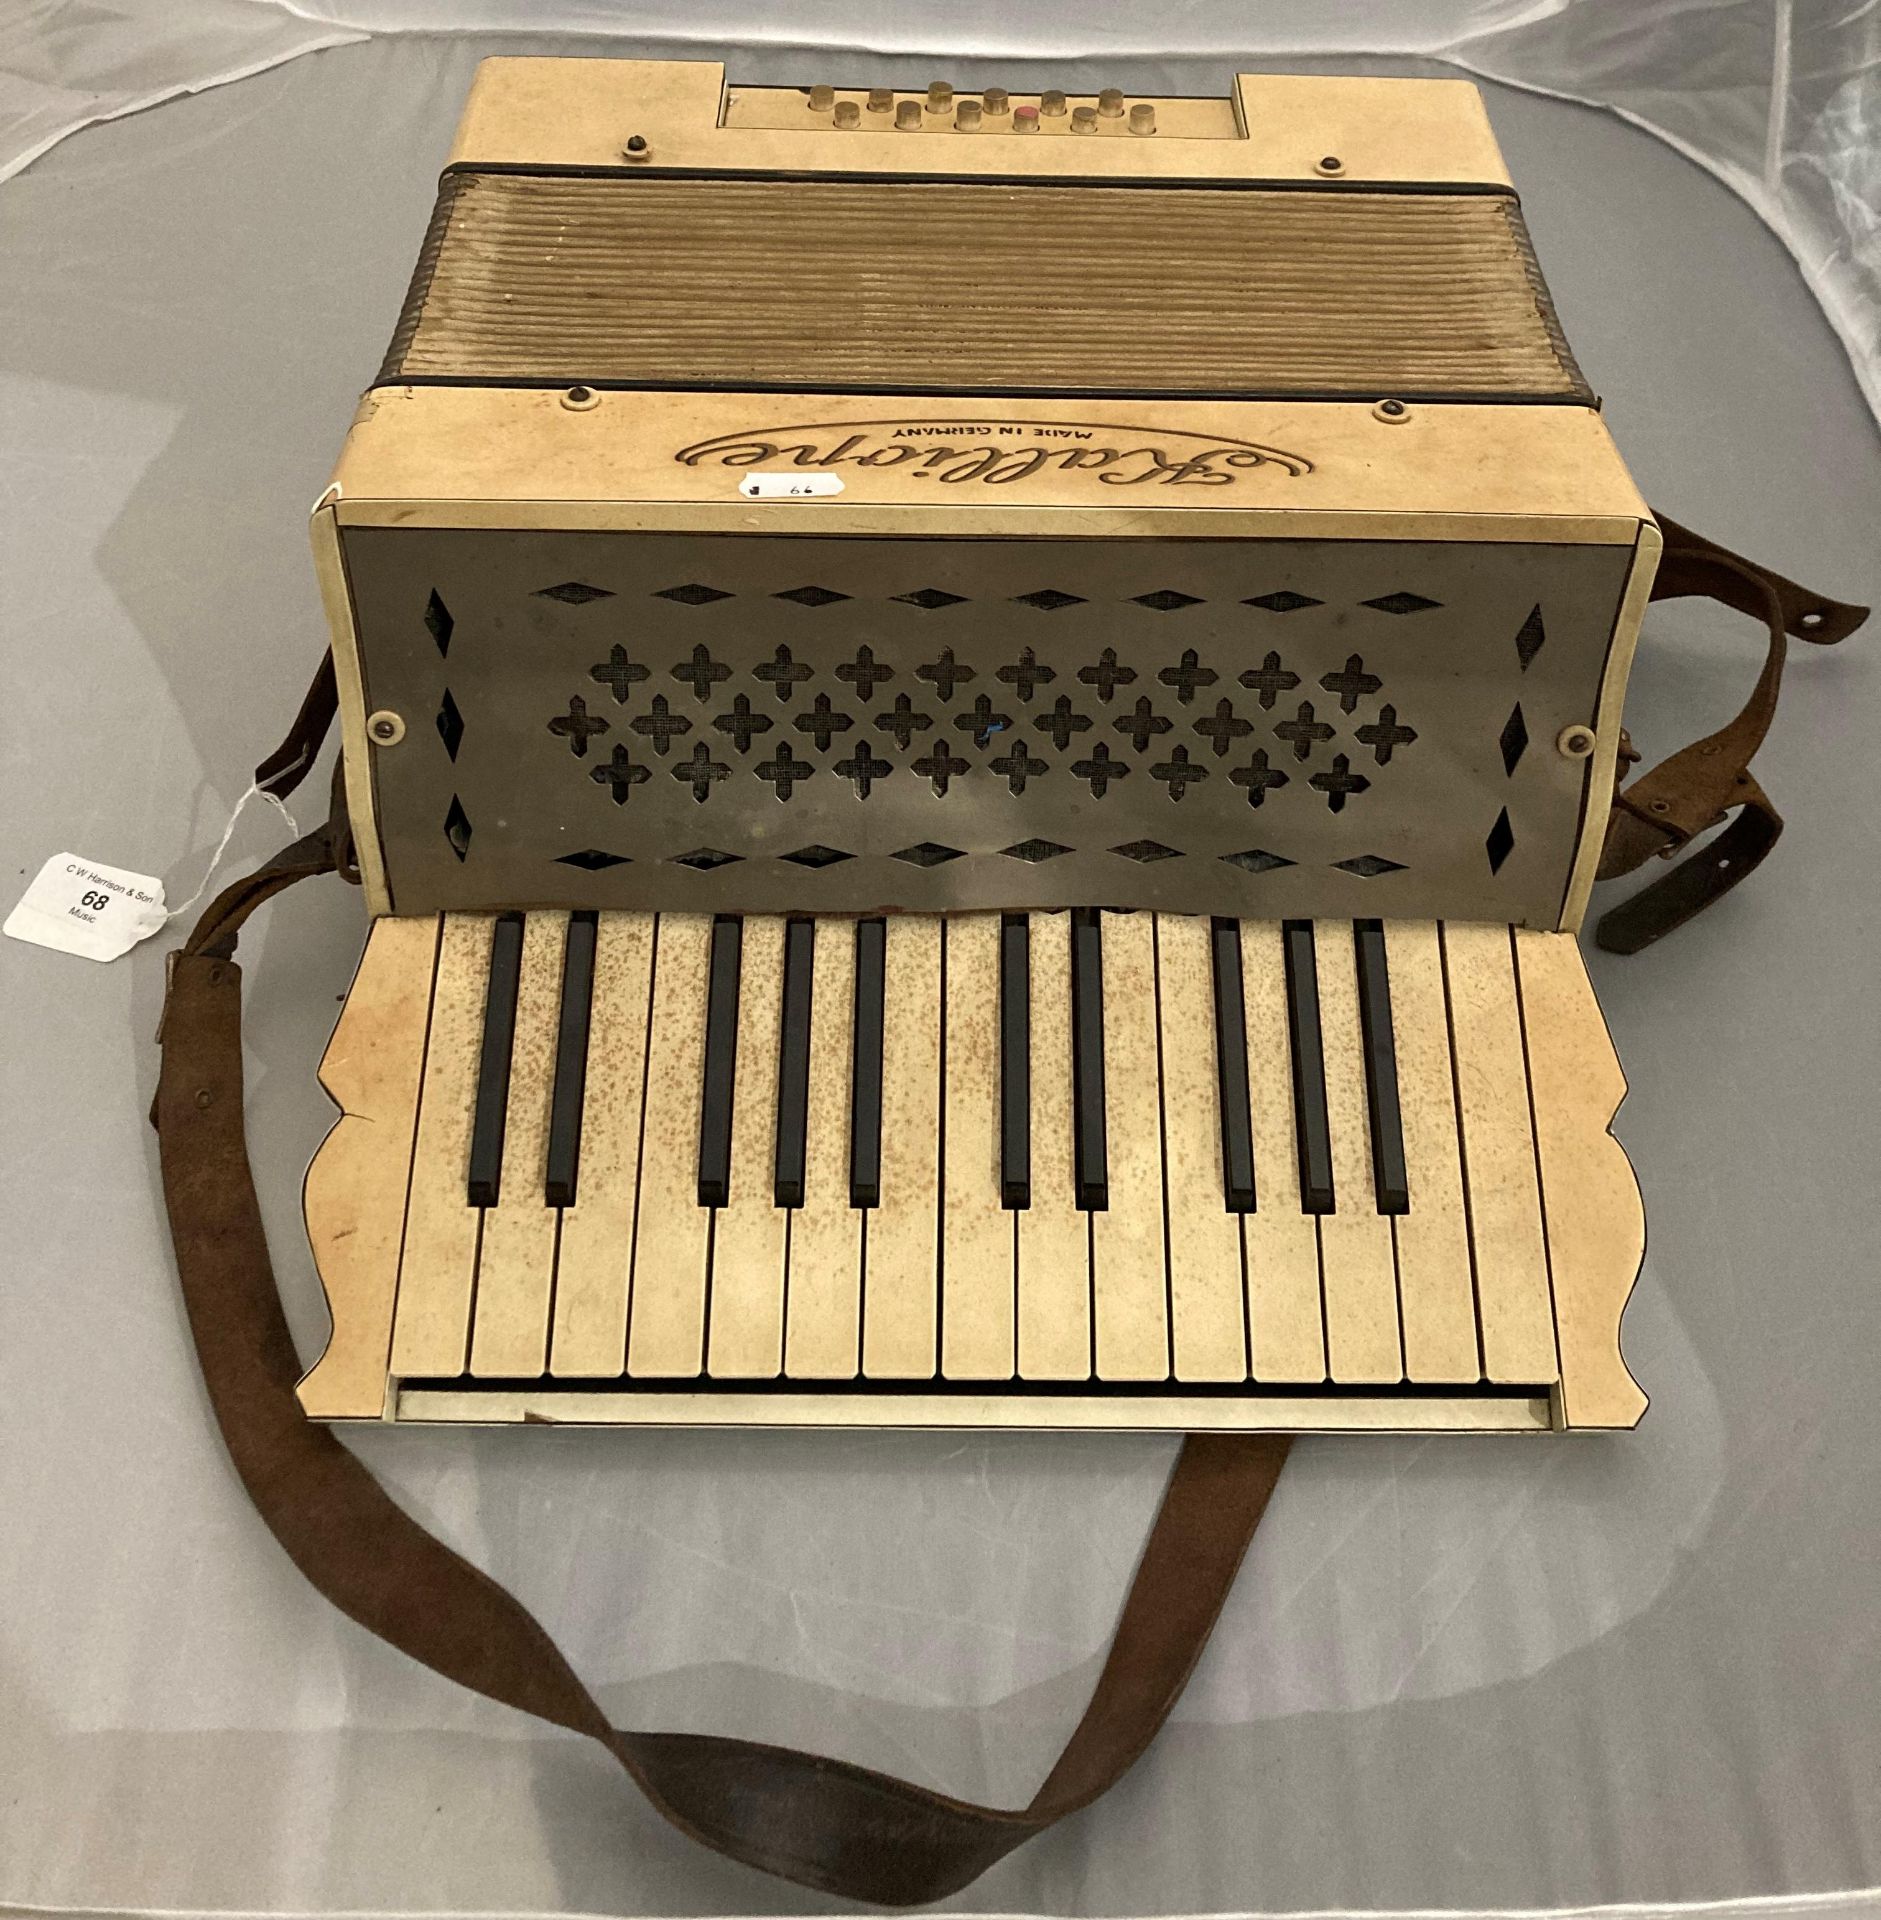 Kalliope accordion made in Germany (some damages to casing etc) (Saleroom location: S3)